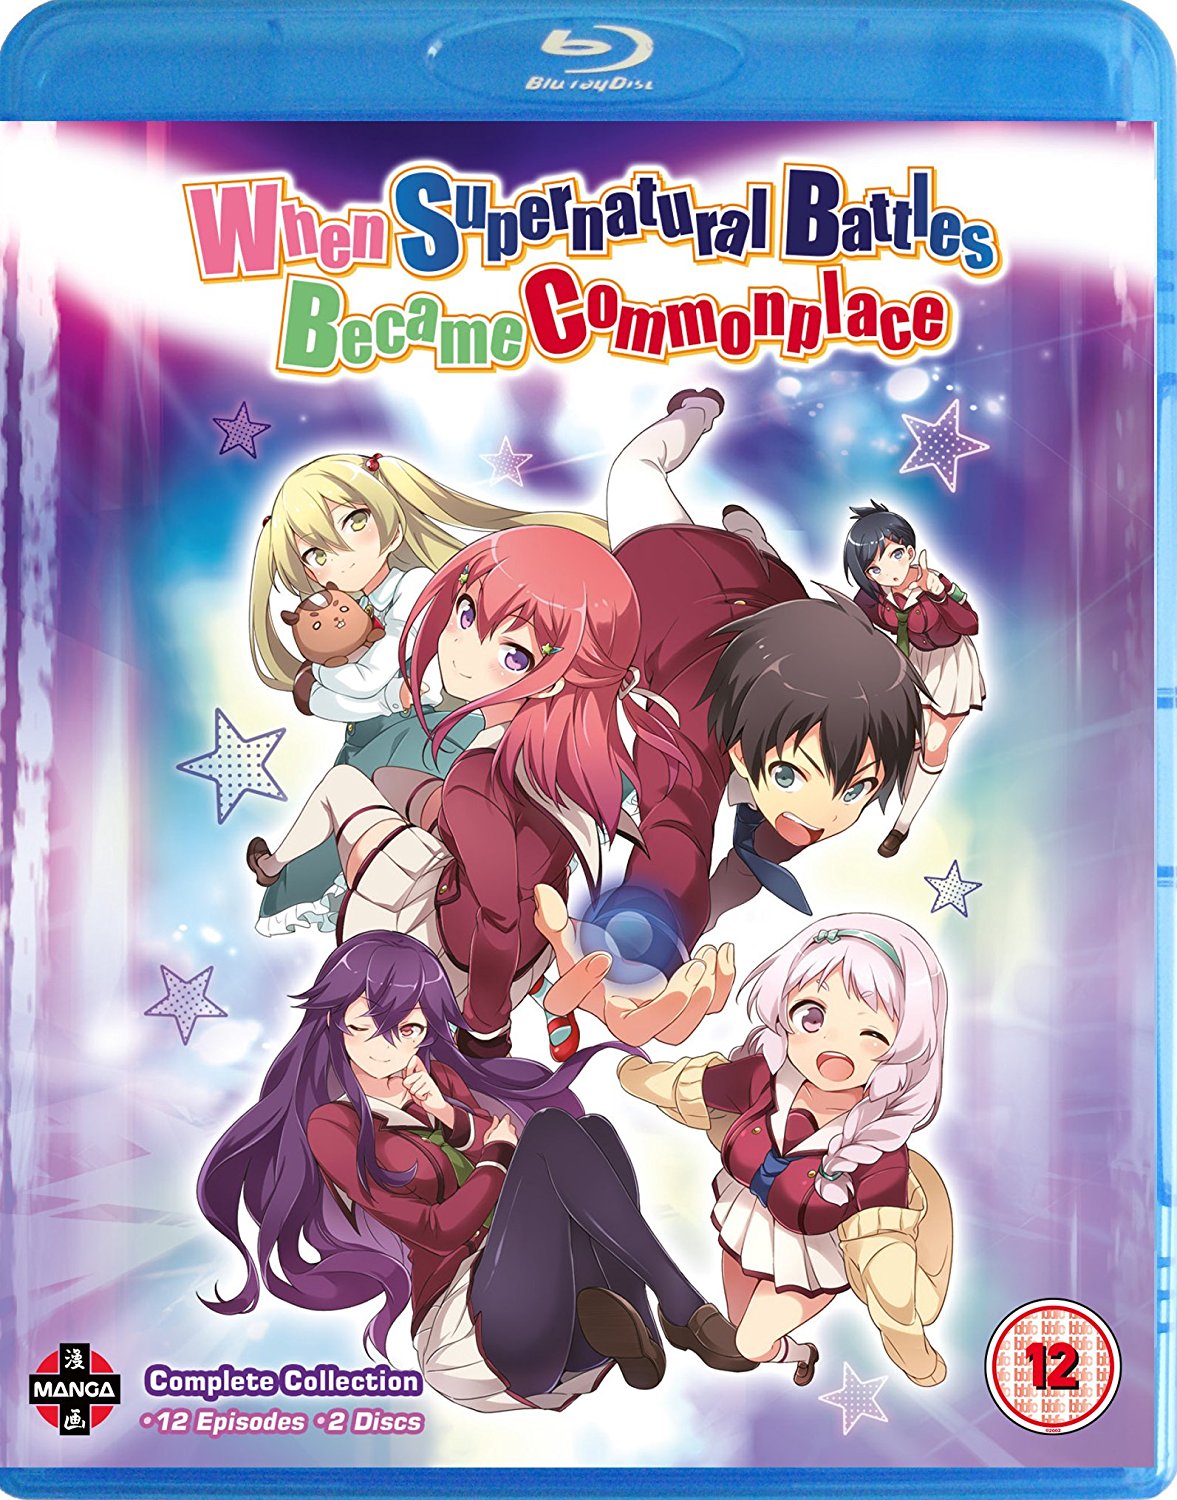 When Supernatural Battles Become Common Place - Complete Season Collection [Blu-ray] (Blu-ray)